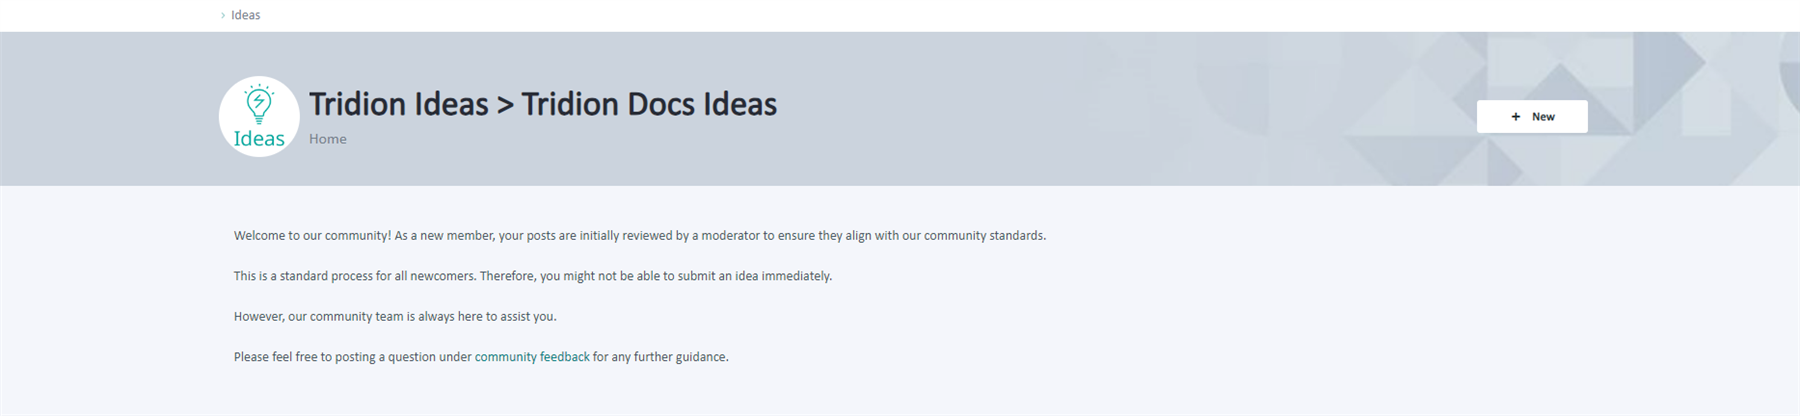 Screenshot of Trados Studio RWS Community page with a message stating new member posts are reviewed by a moderator and may not be able to submit an idea immediately, with a 'New' button visible but not active.